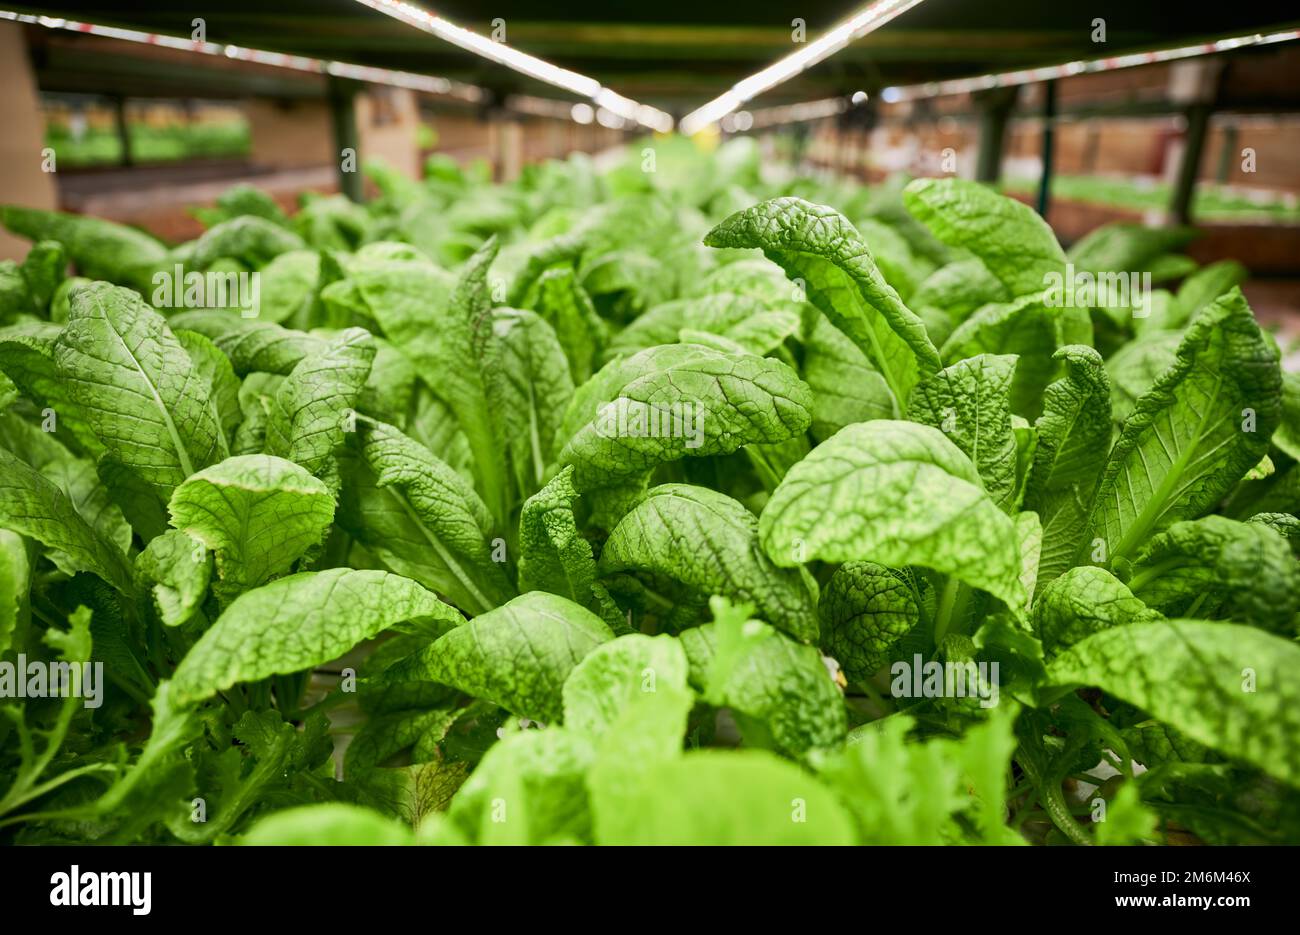 Leafy greens growing in agricultural hydroponic greenhouse. Large mustard leaves of green leafy plant cultivated in greenhouse or garden center. Stock Photo